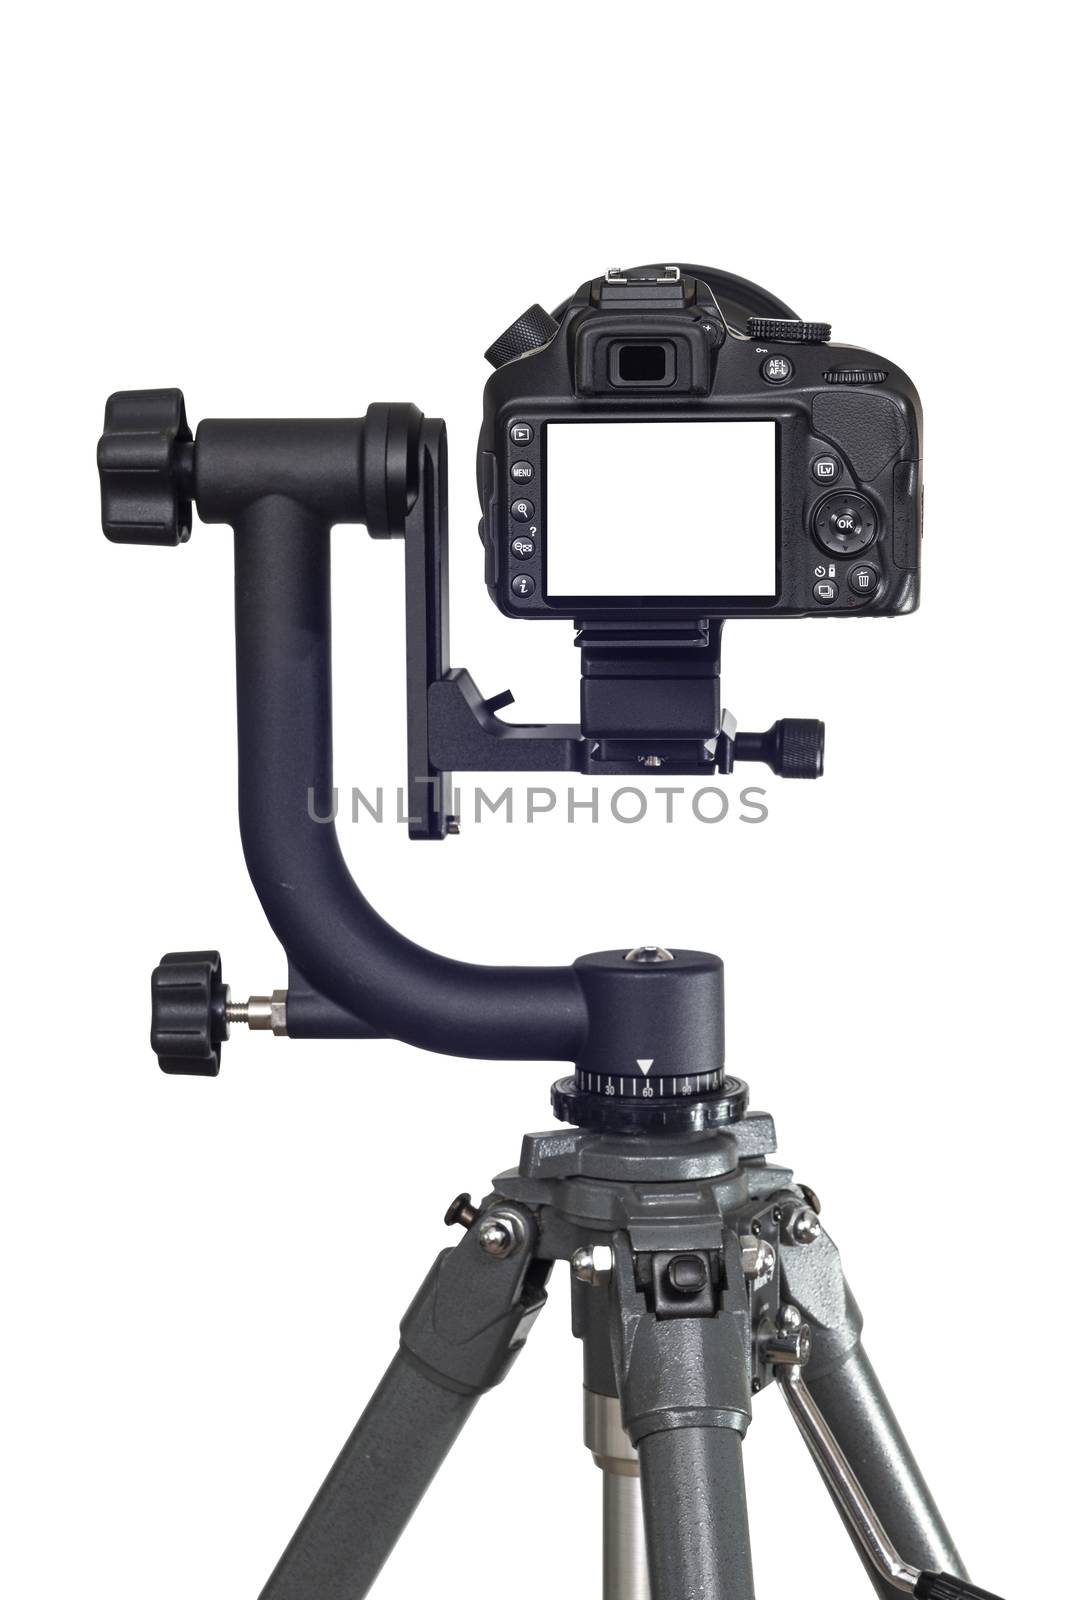 Vertical rear view shot of a digital camera showing a big blank LCD screen on a white background.  Camera is mounted to a Gimbal Head on a tripod.